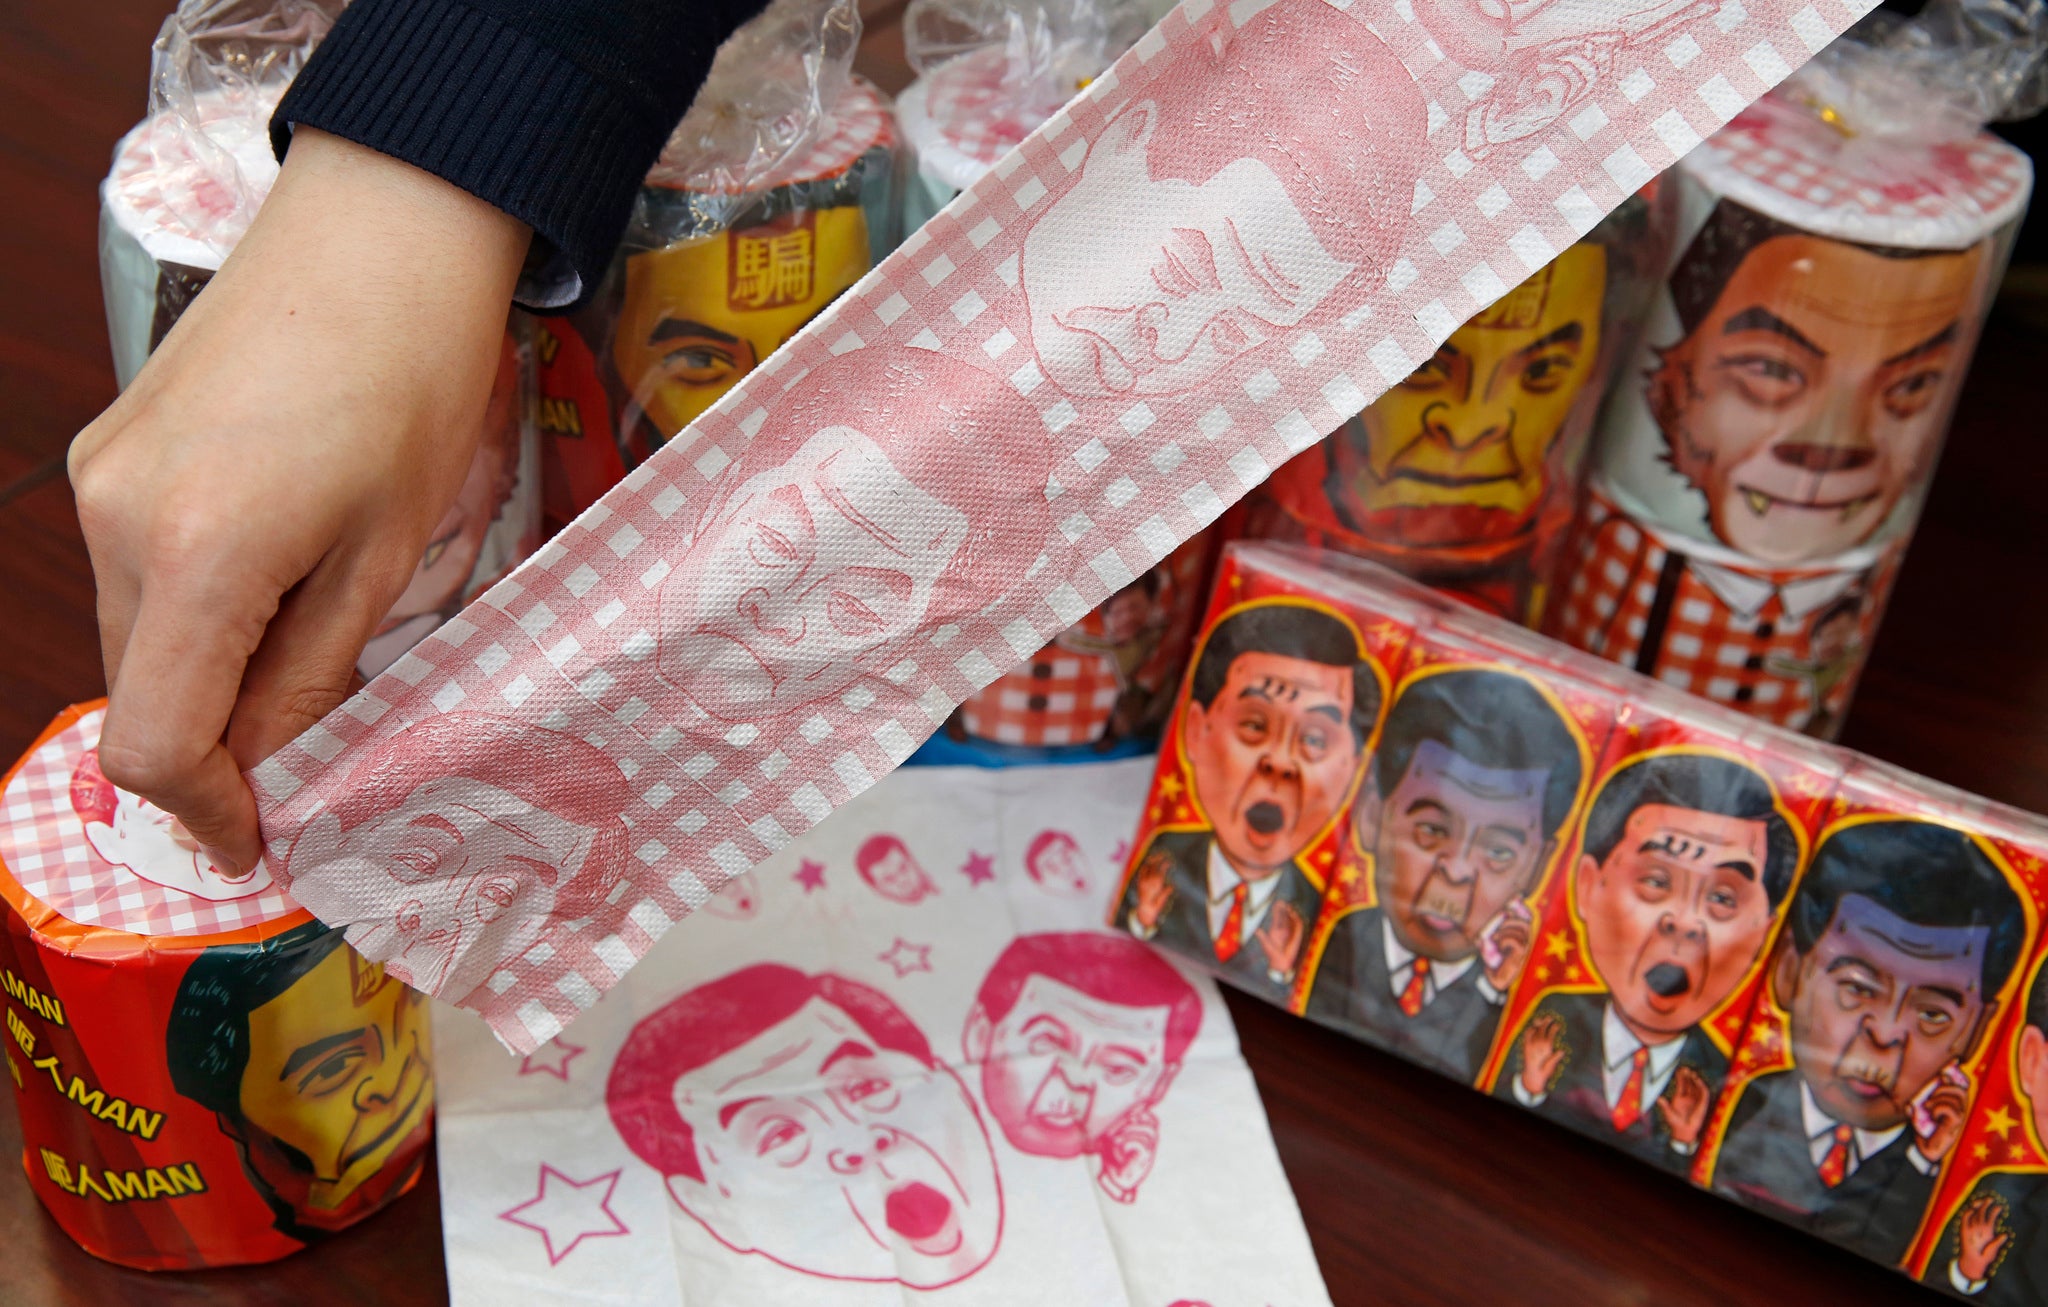 Hong Kong Democratic Party Vice Chairman Lo Kin-hei shows off rolls of toilet paper and packages of tissue paper printed with images of pro-Beijing Hong Kong Chief Executive Leung Chun-ying at his office in Hong Kong Saturday, Feb. 7, 2015. Lo said Saturd